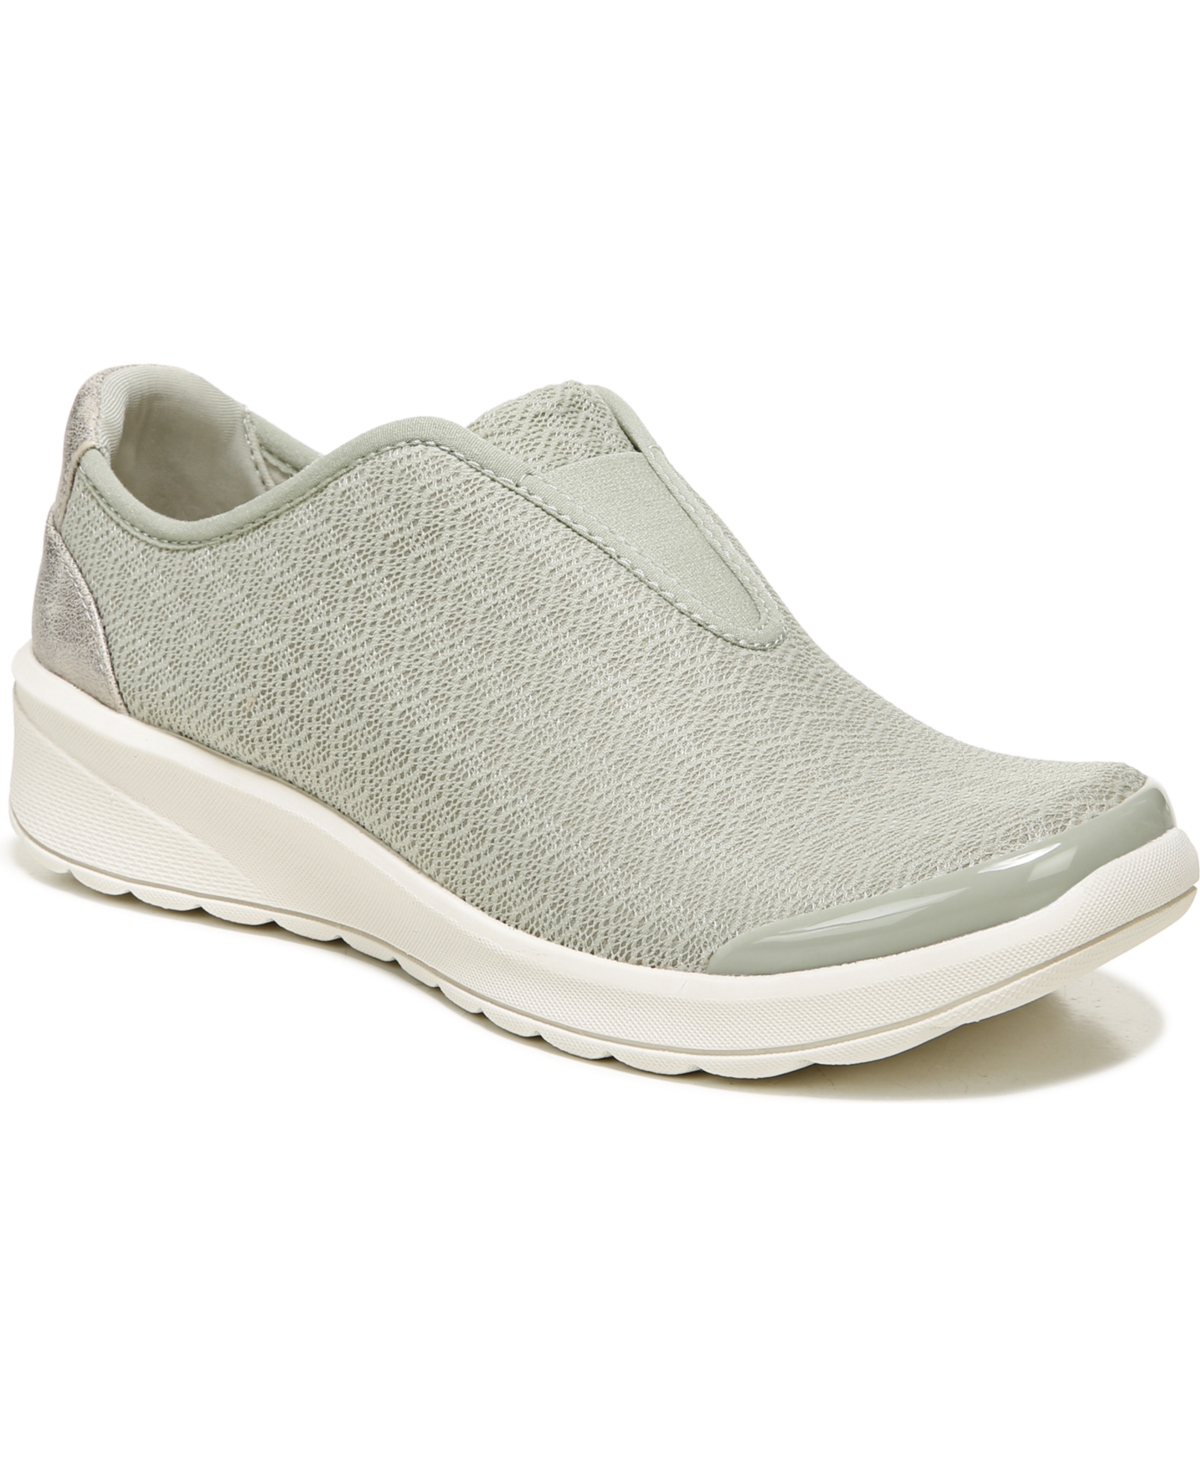 BZEES BZEES GLORY WASHABLE SLIP-ON SNEAKERS WOMEN'S SHOES